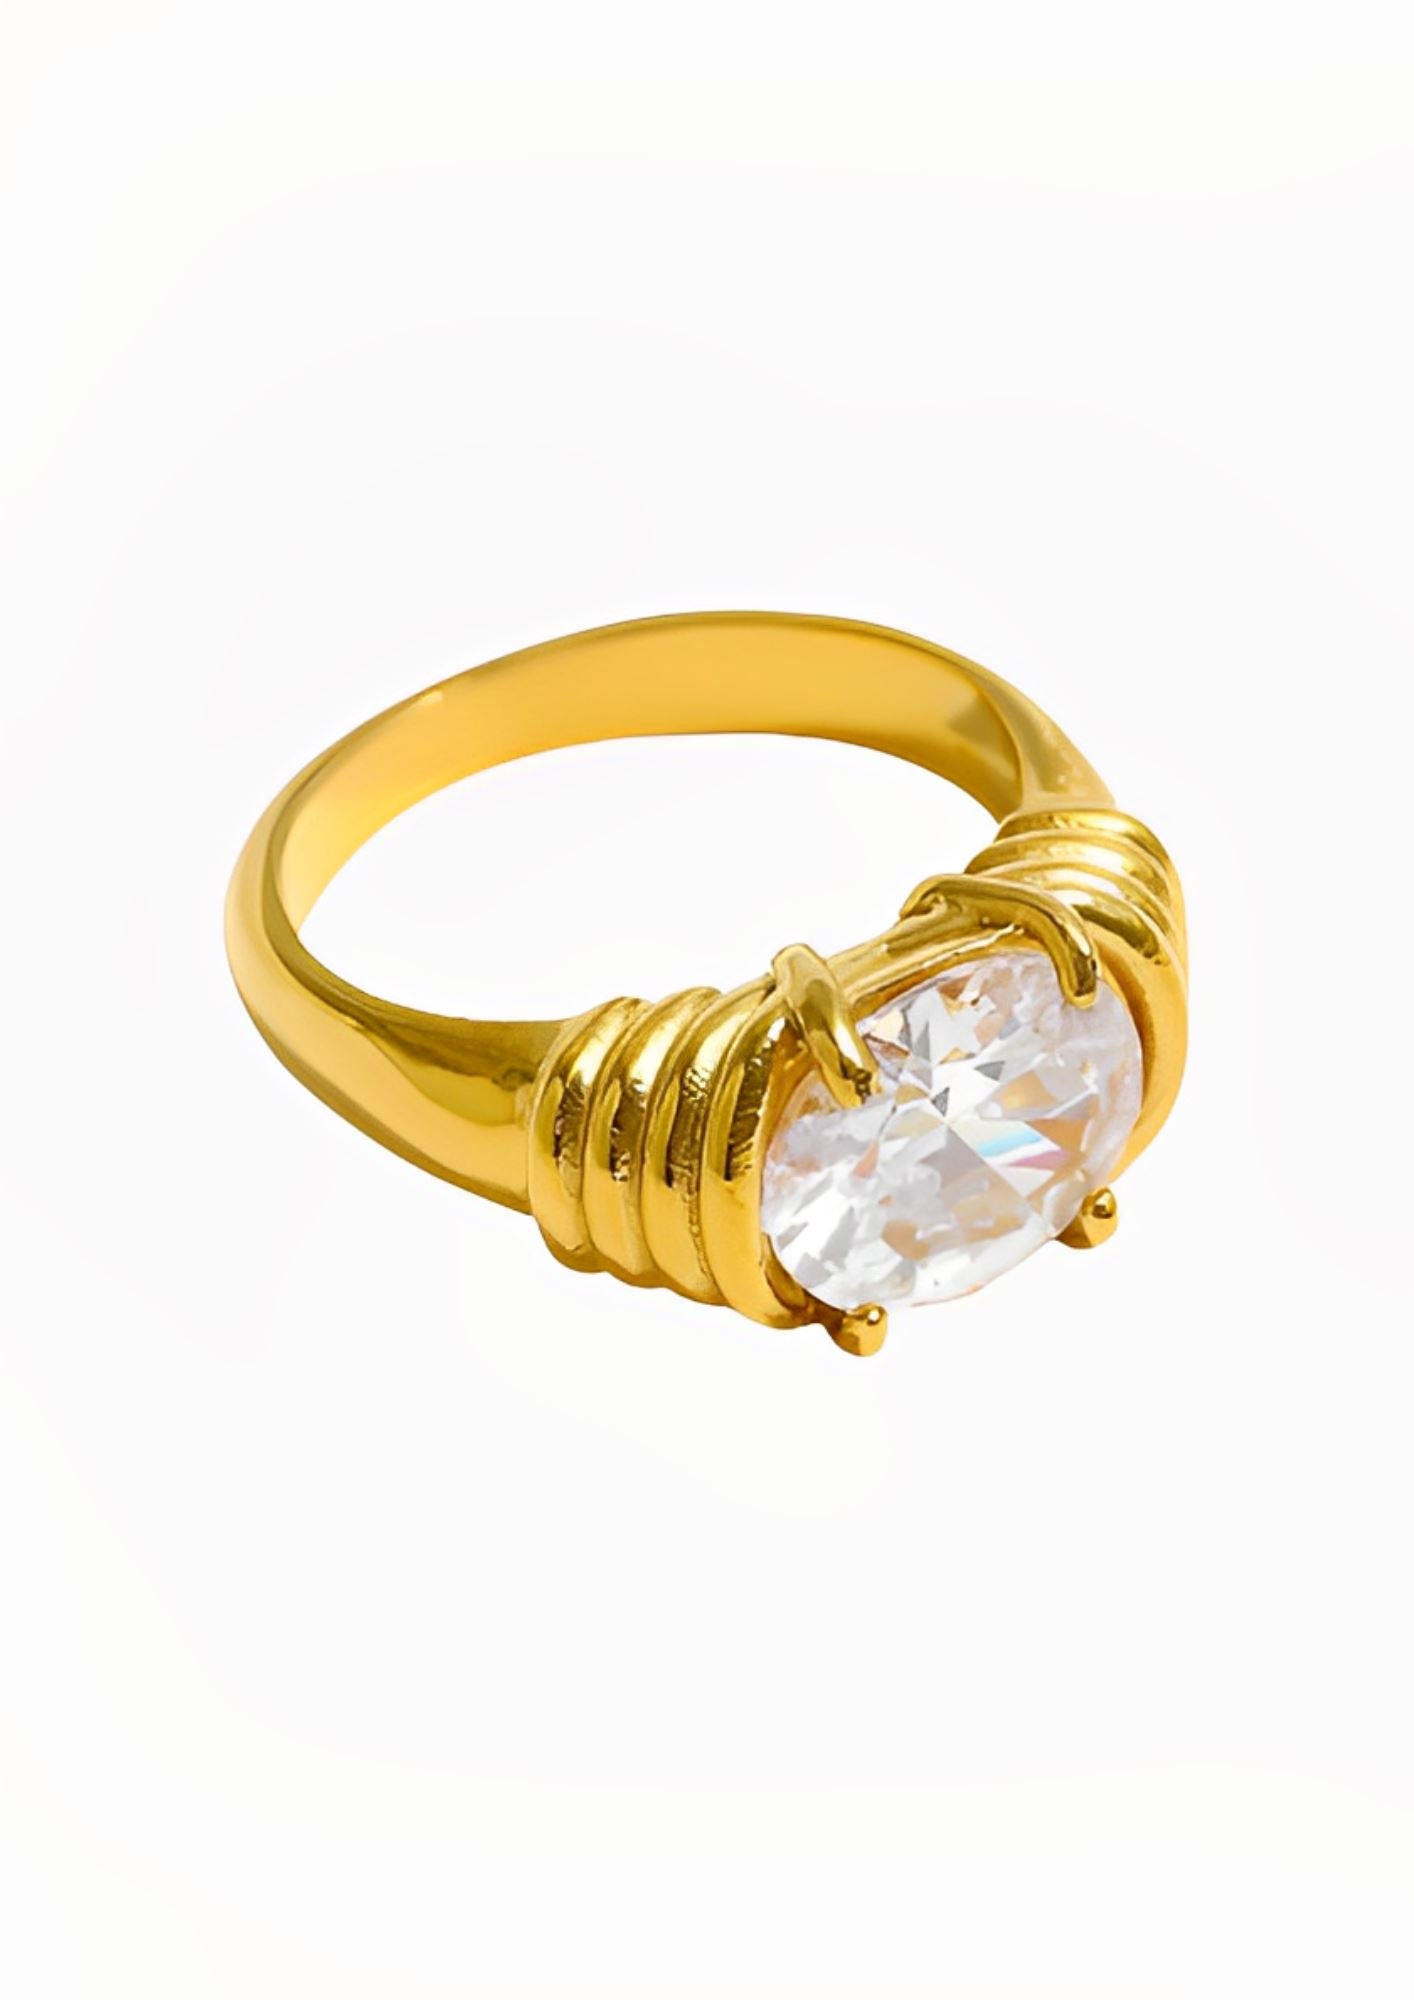 ELISABETH STONE RING ring Yubama Jewelry Online Store - The Elegant Designs of Gold and Silver ! Number6 